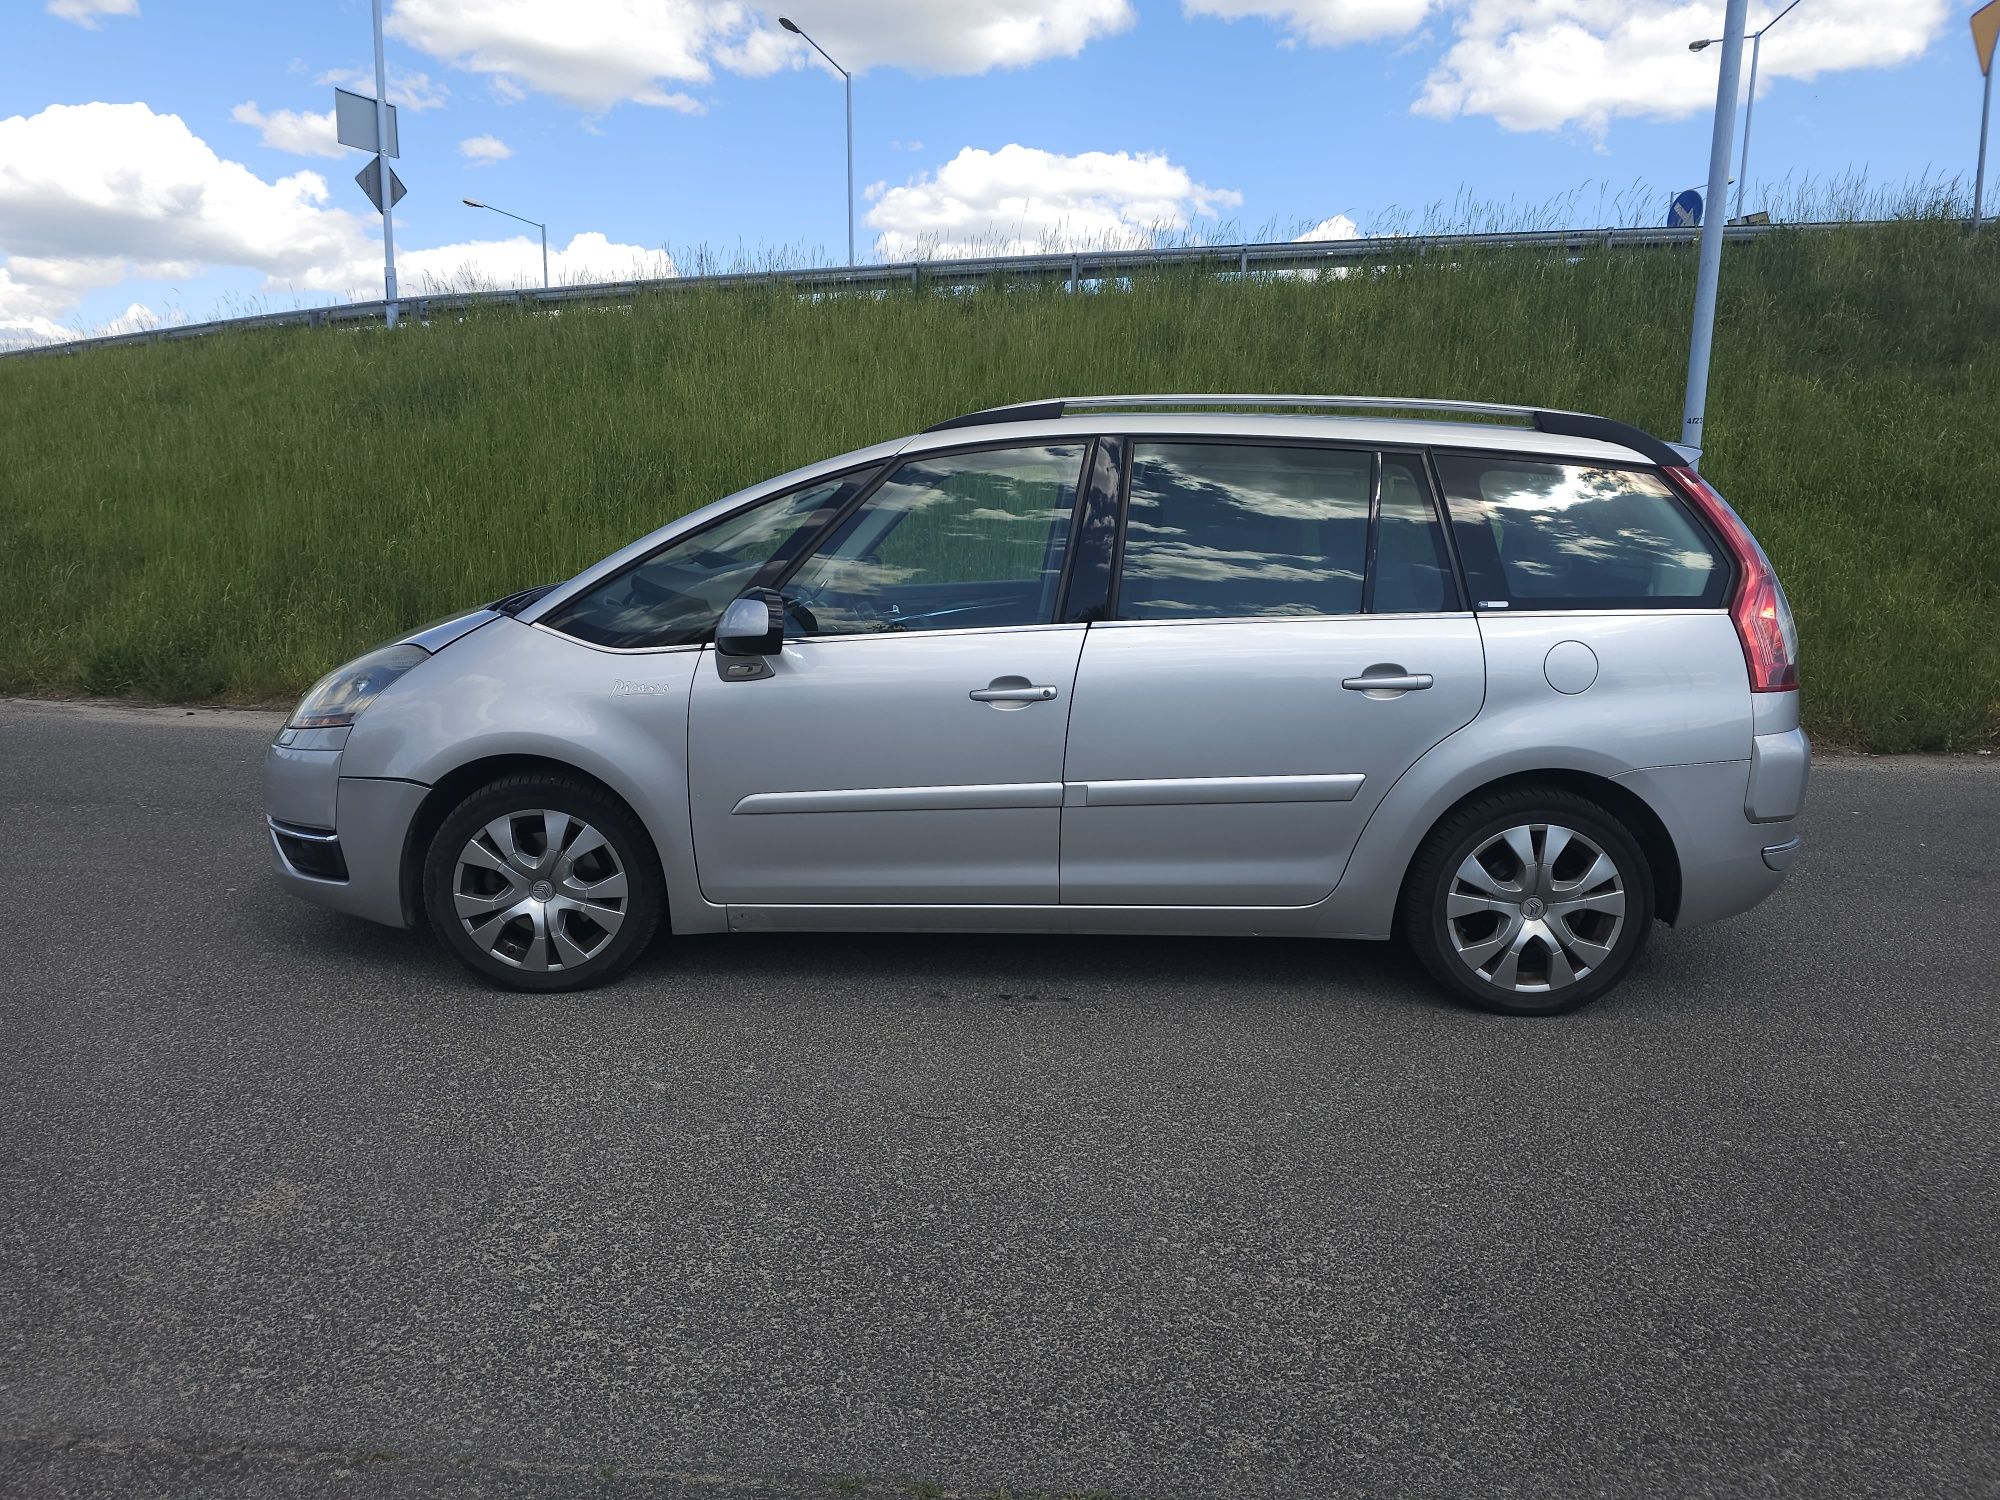 Citroen C4 Grand Picasso 2.0 HDI 7 osobowy